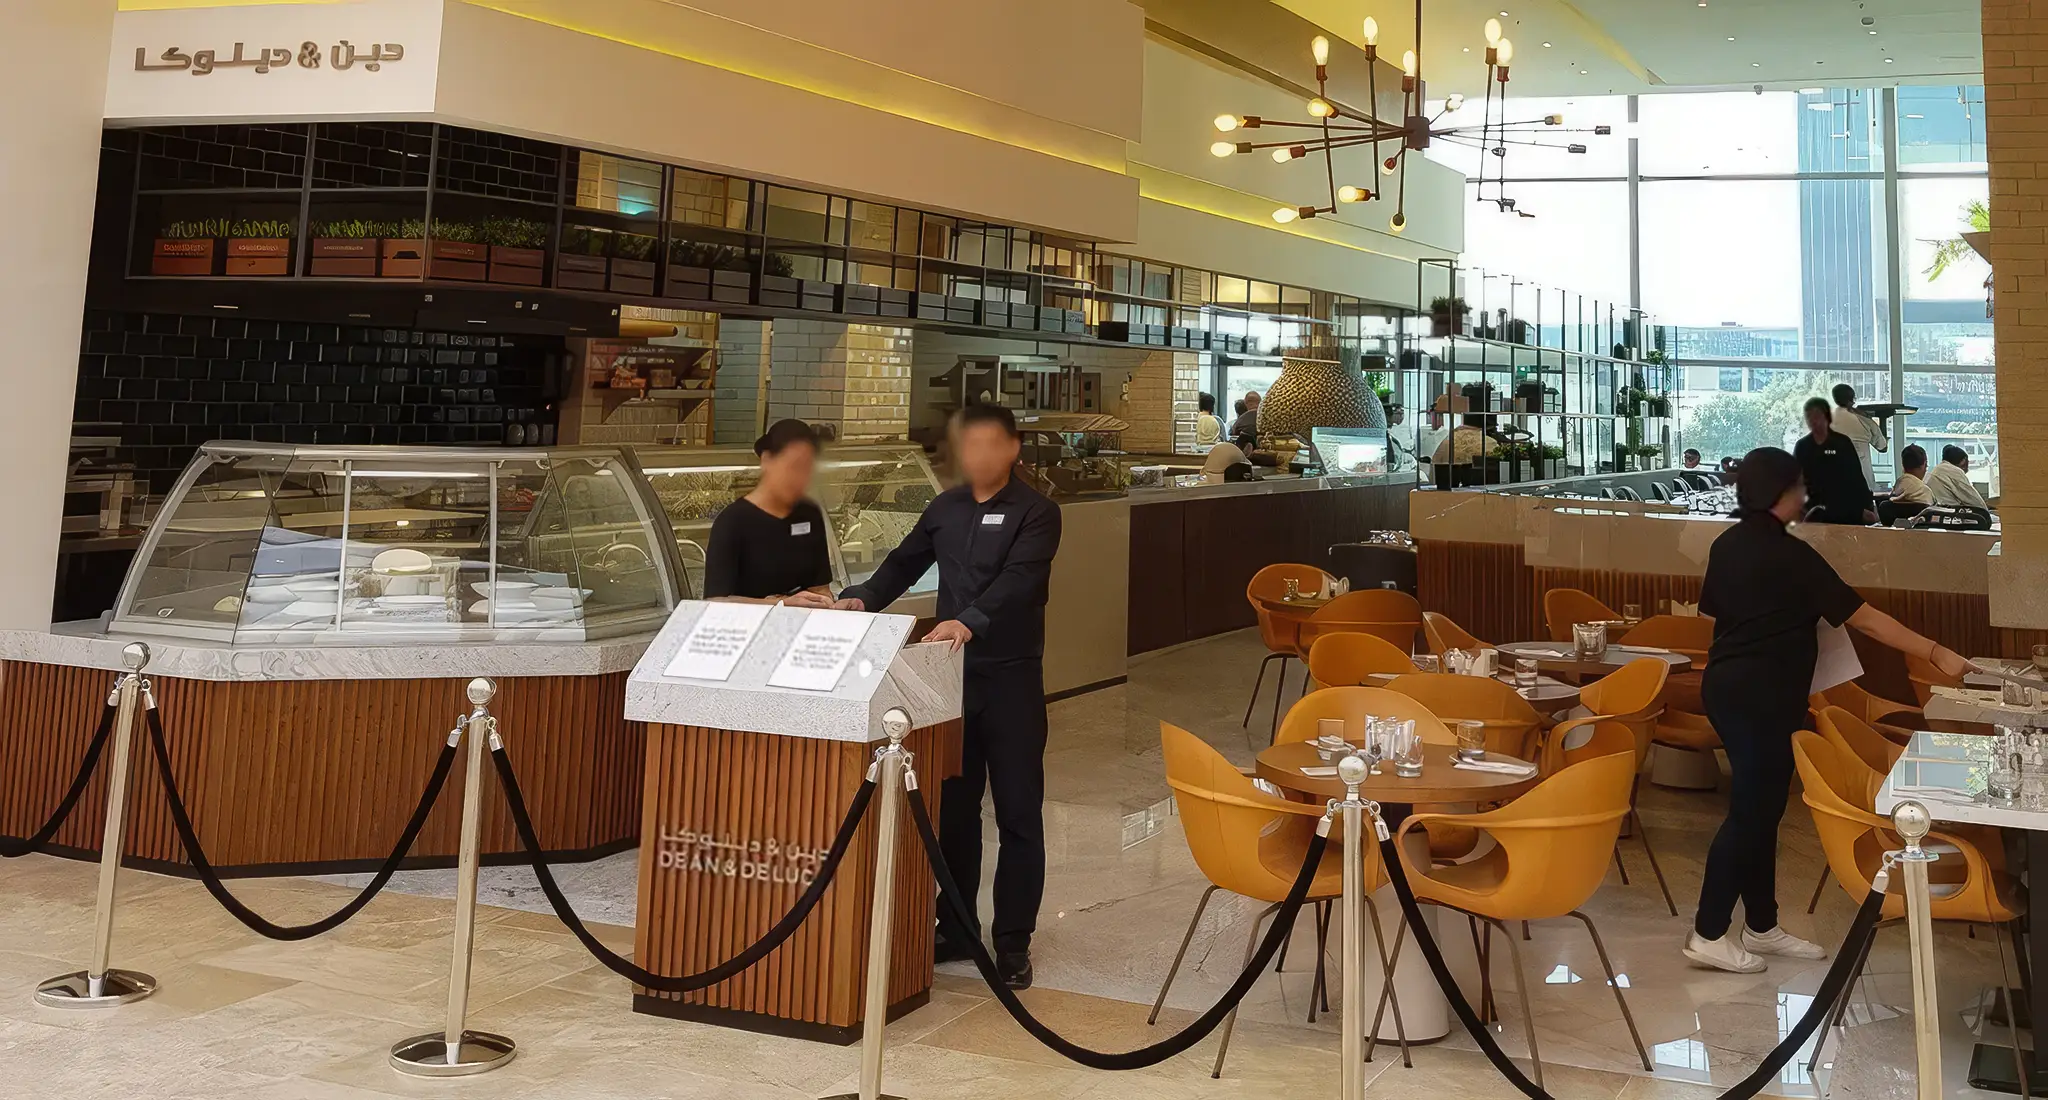 a view inside dean & deluca in bahrain, revealing individuals gathered and conversing within the establishment.